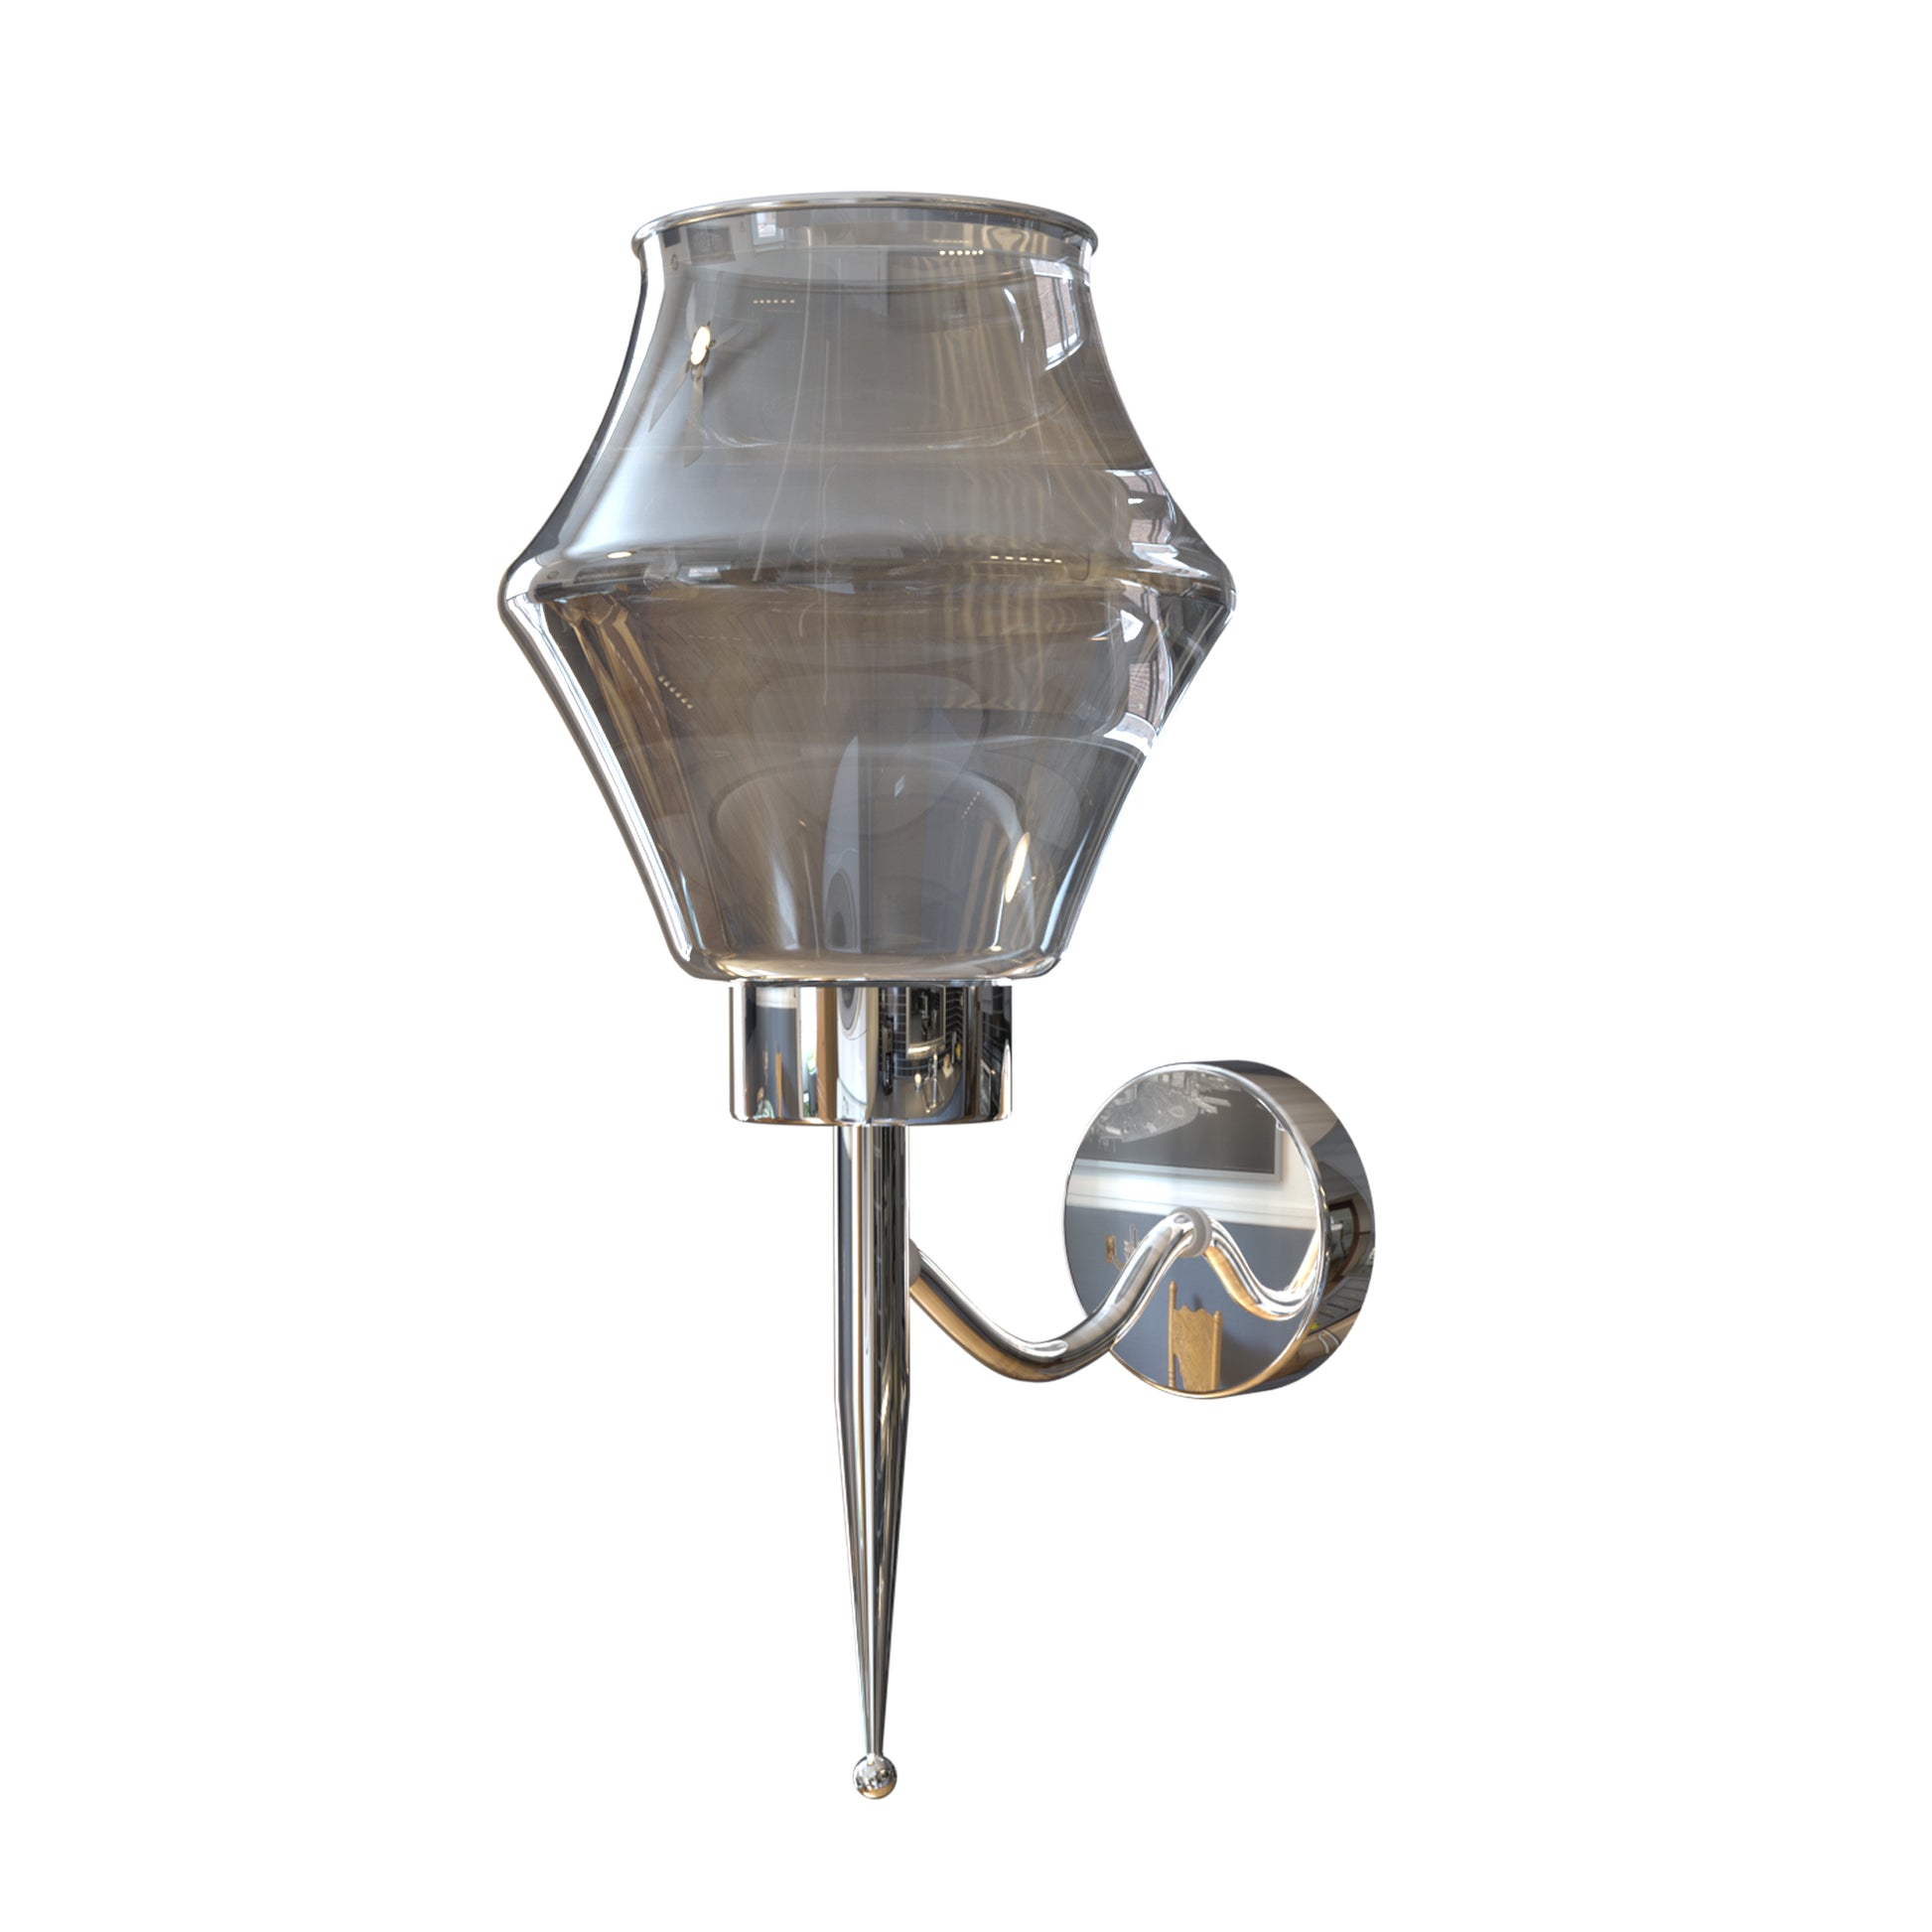 Modern Wall Light with Smoked Glass, Chrome Plate - Ideal for Indoor Use, Living Rooms, Bedrooms, Restaurants, & Cafés